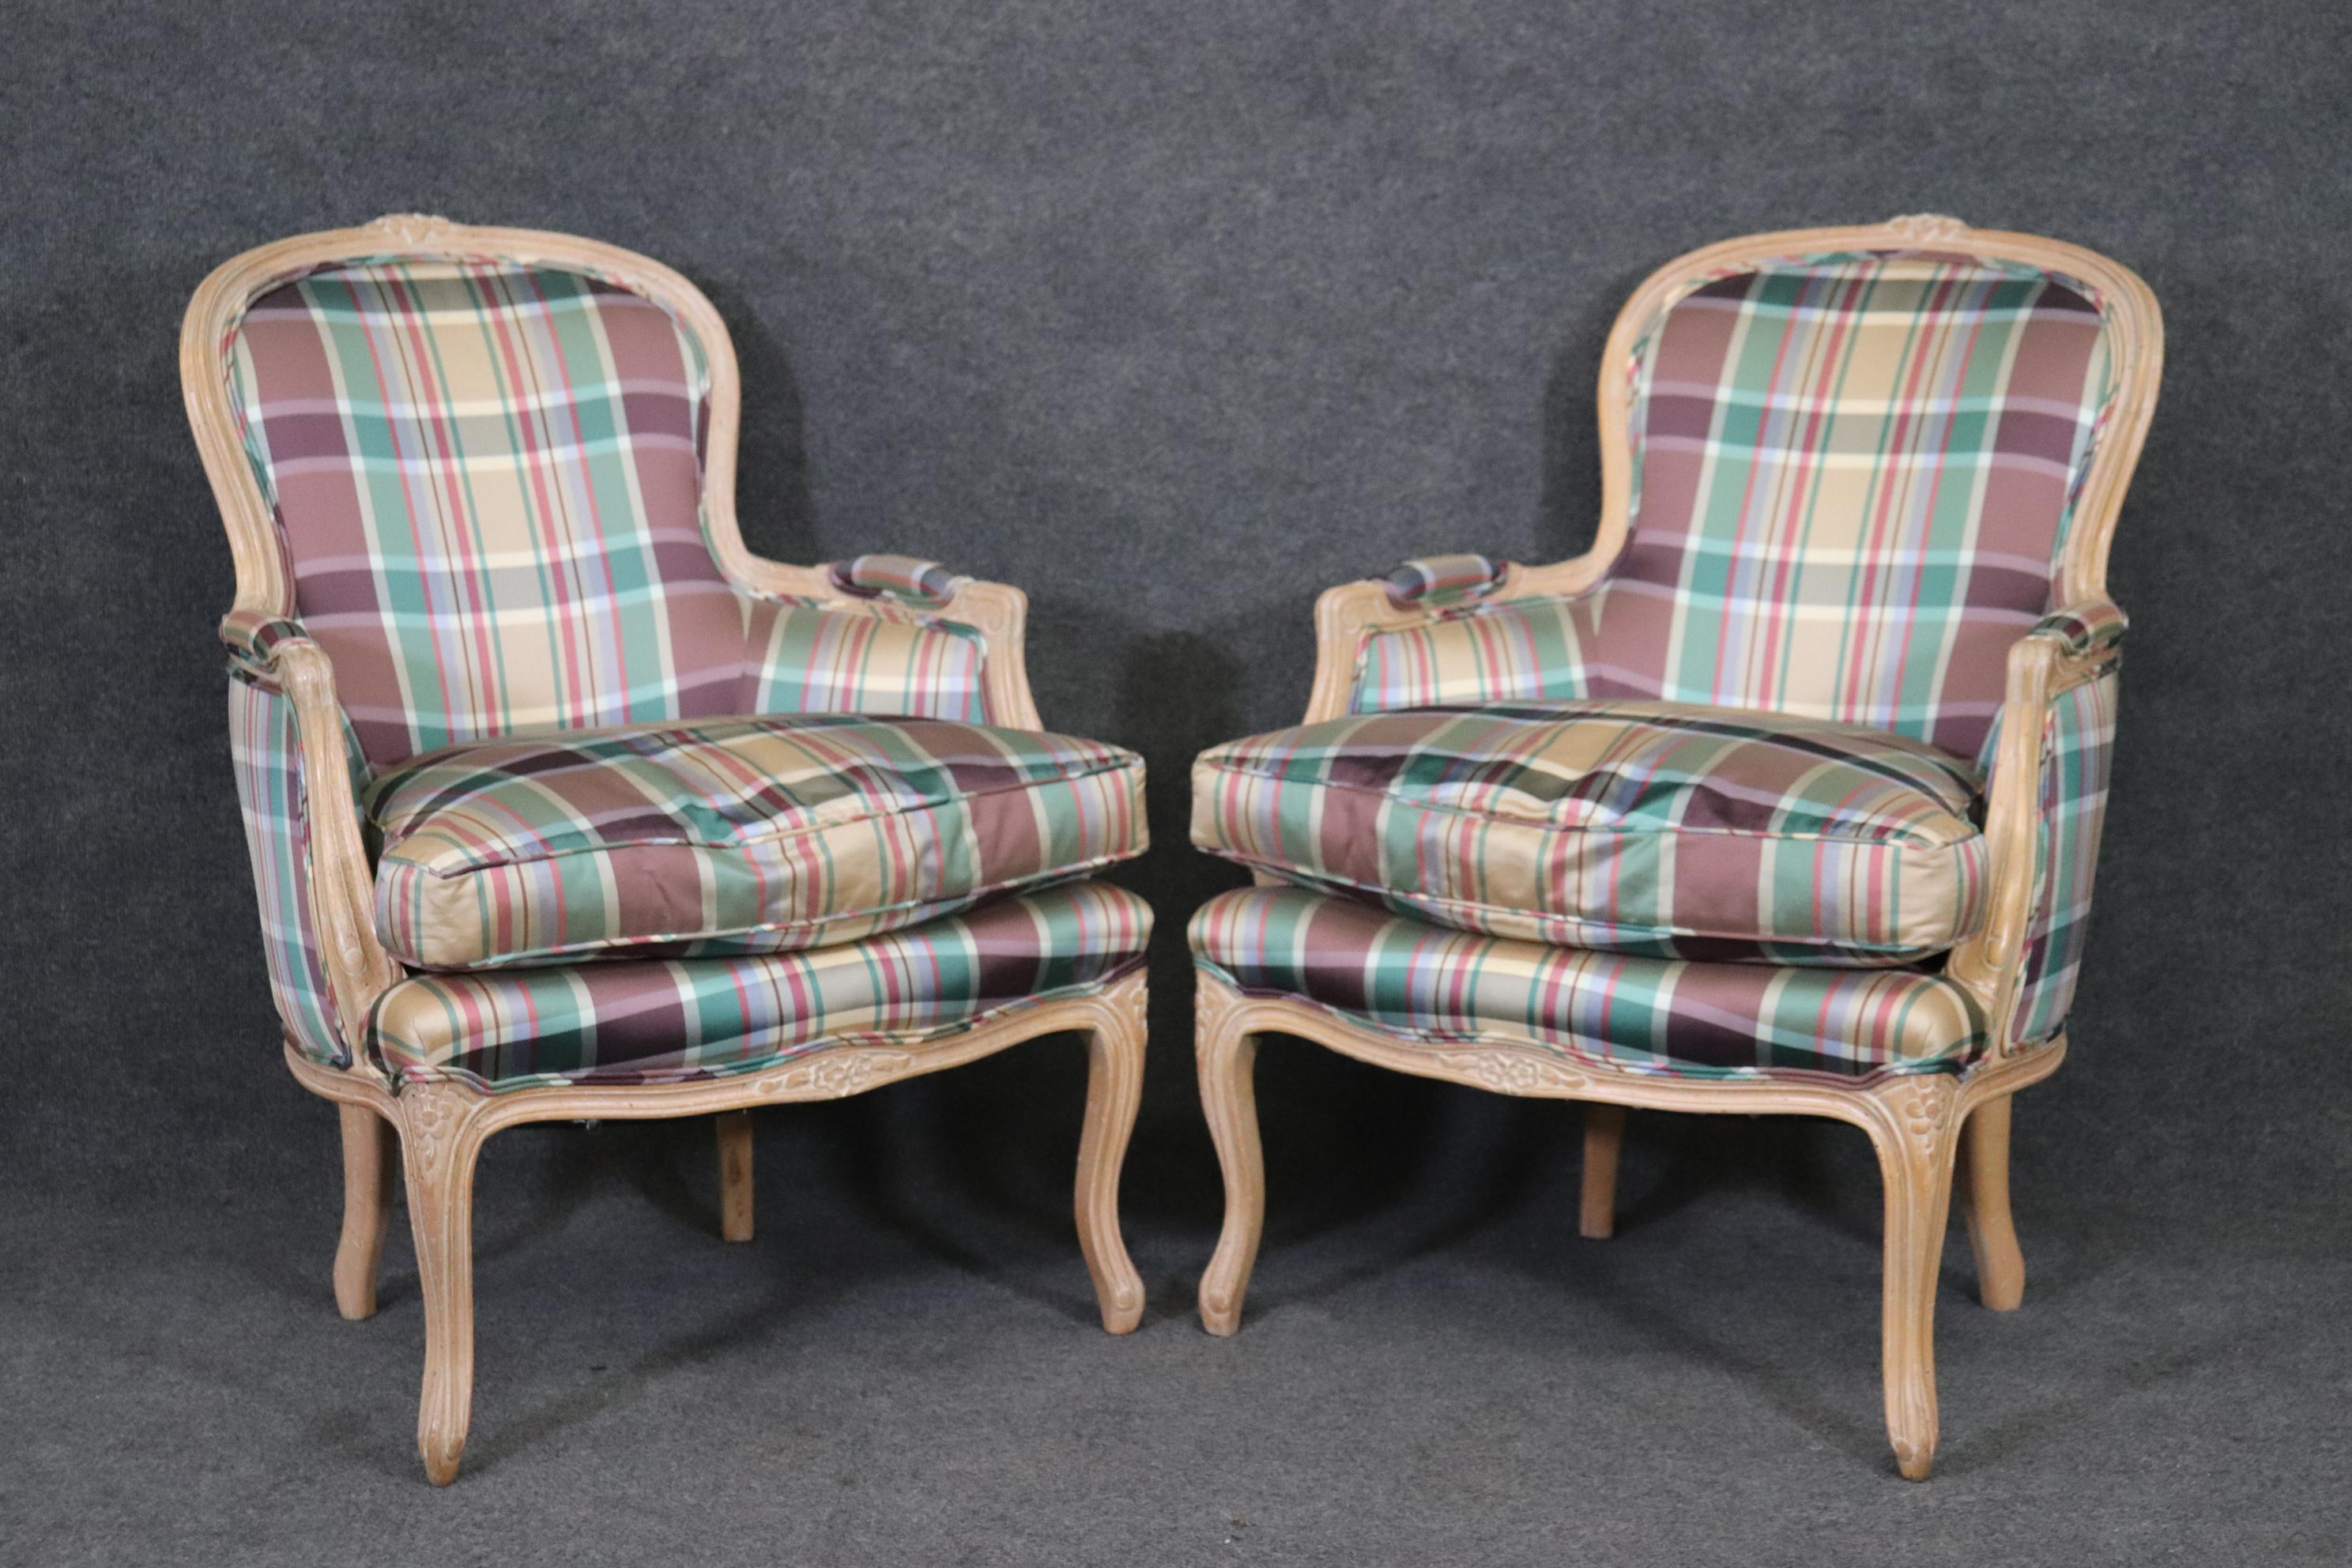 This is a gorgeous pair of French style American made bergeres. The chairs are in beautiful plaid upholstery and have a wonderful color combination that really works well in bright well-lit settings. The chairs are whitewashed beech frames and look